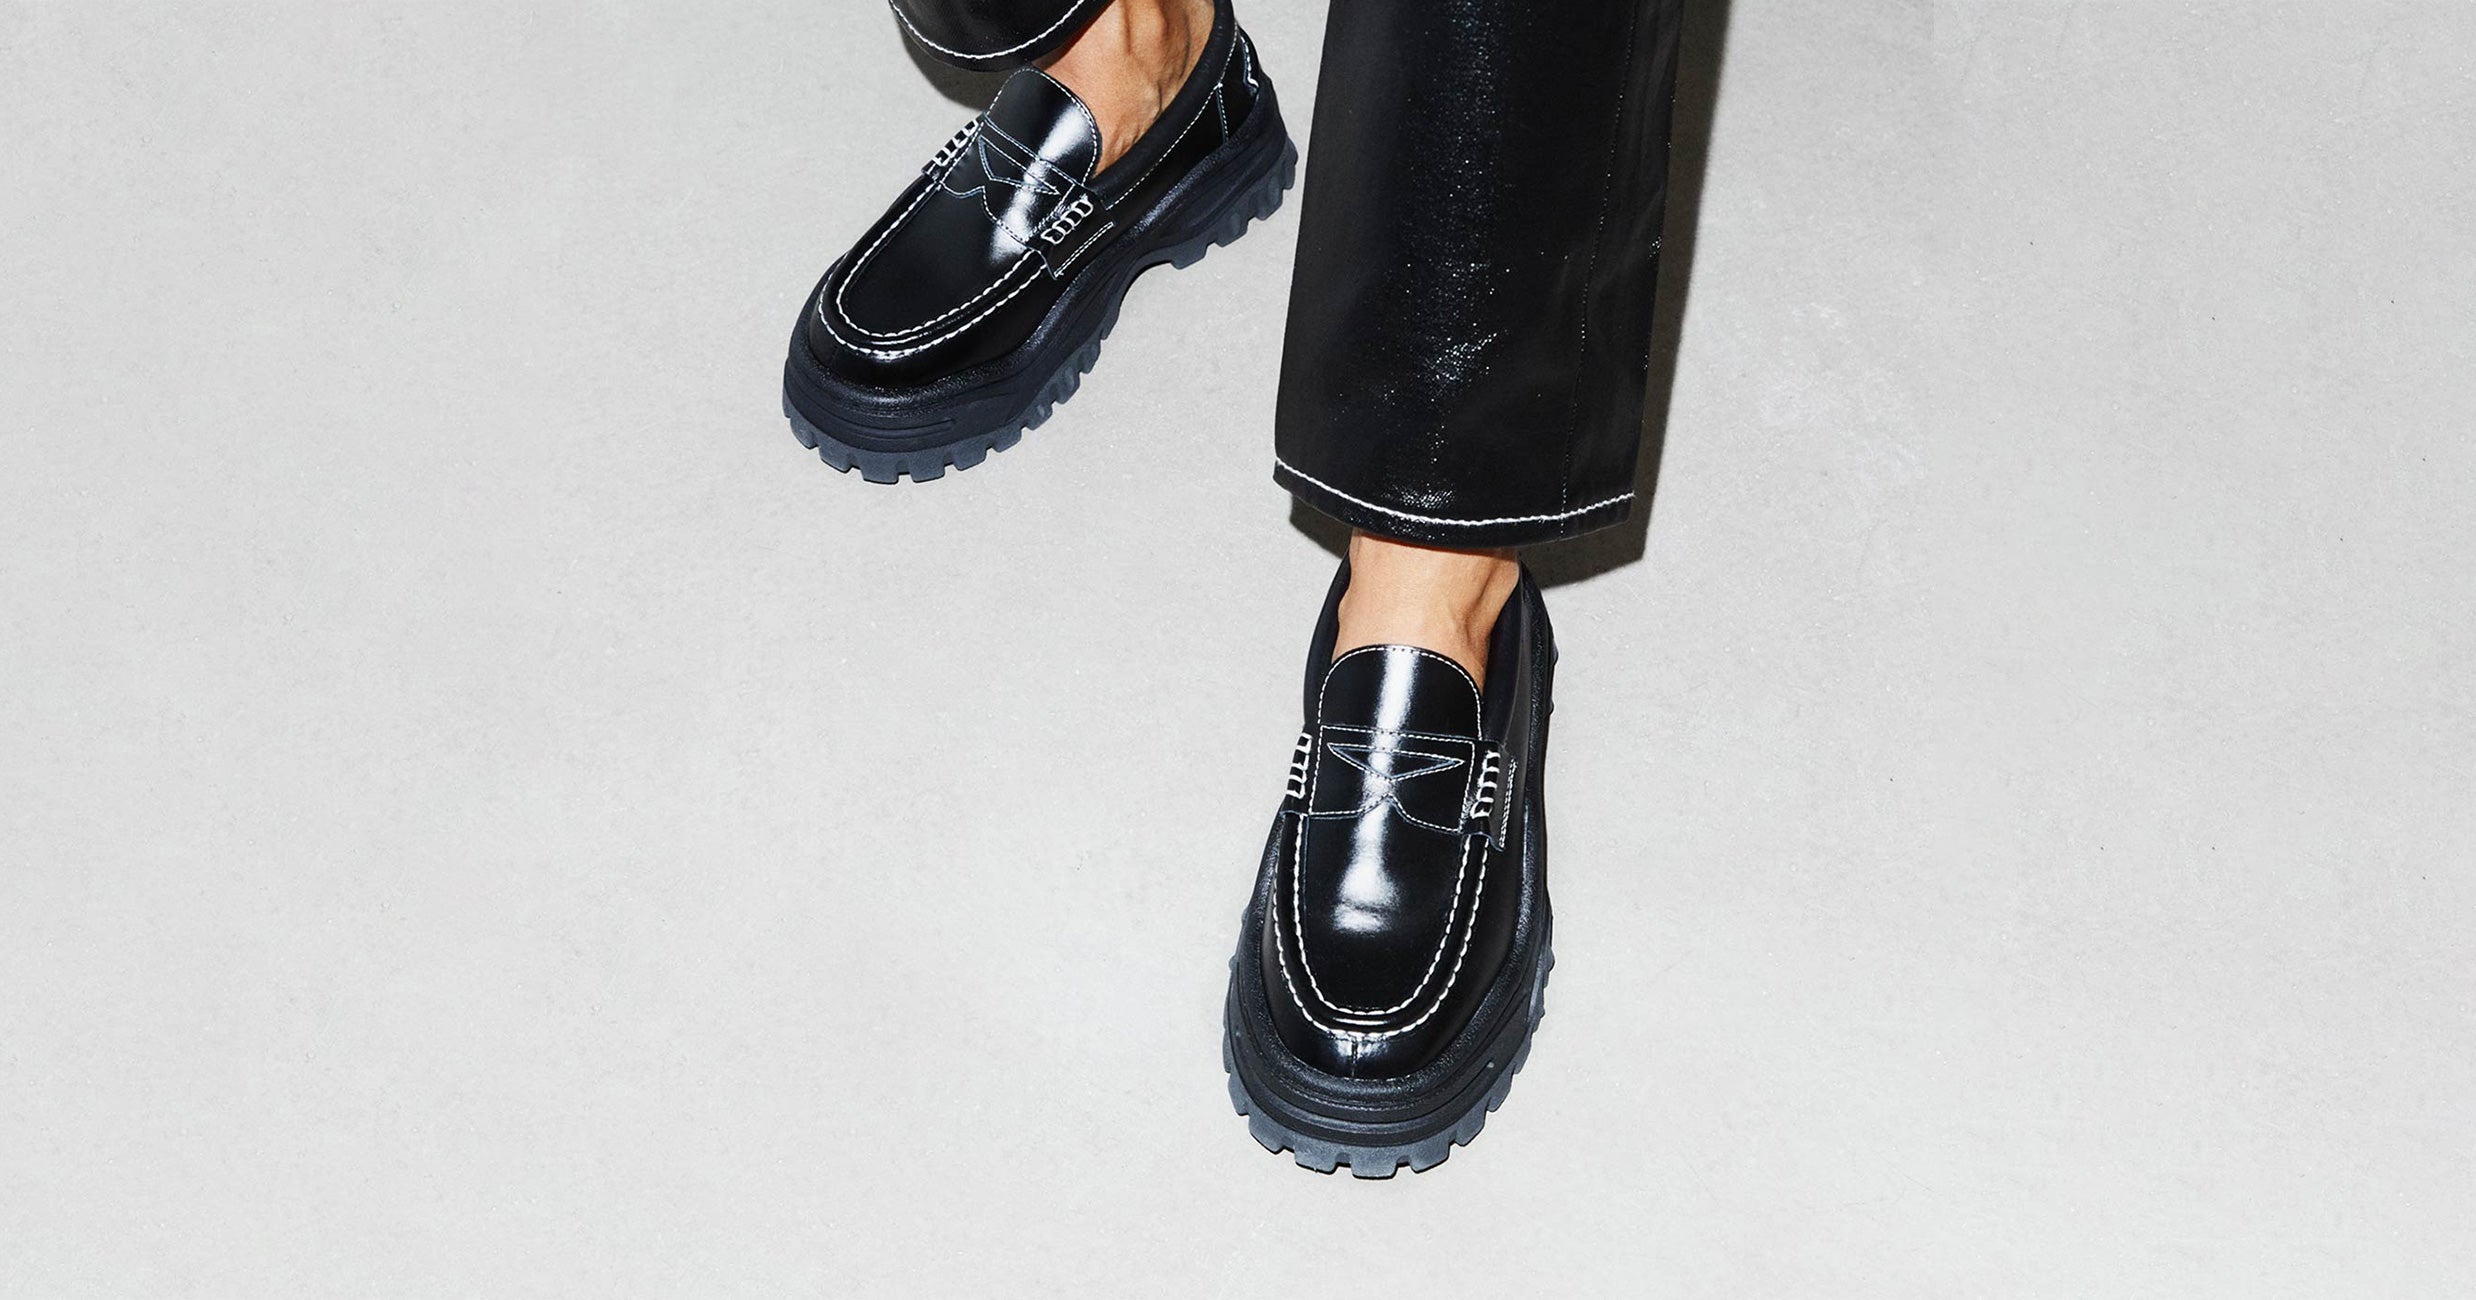 Chunky Loafers Are Women's Hottest Shoe Trend